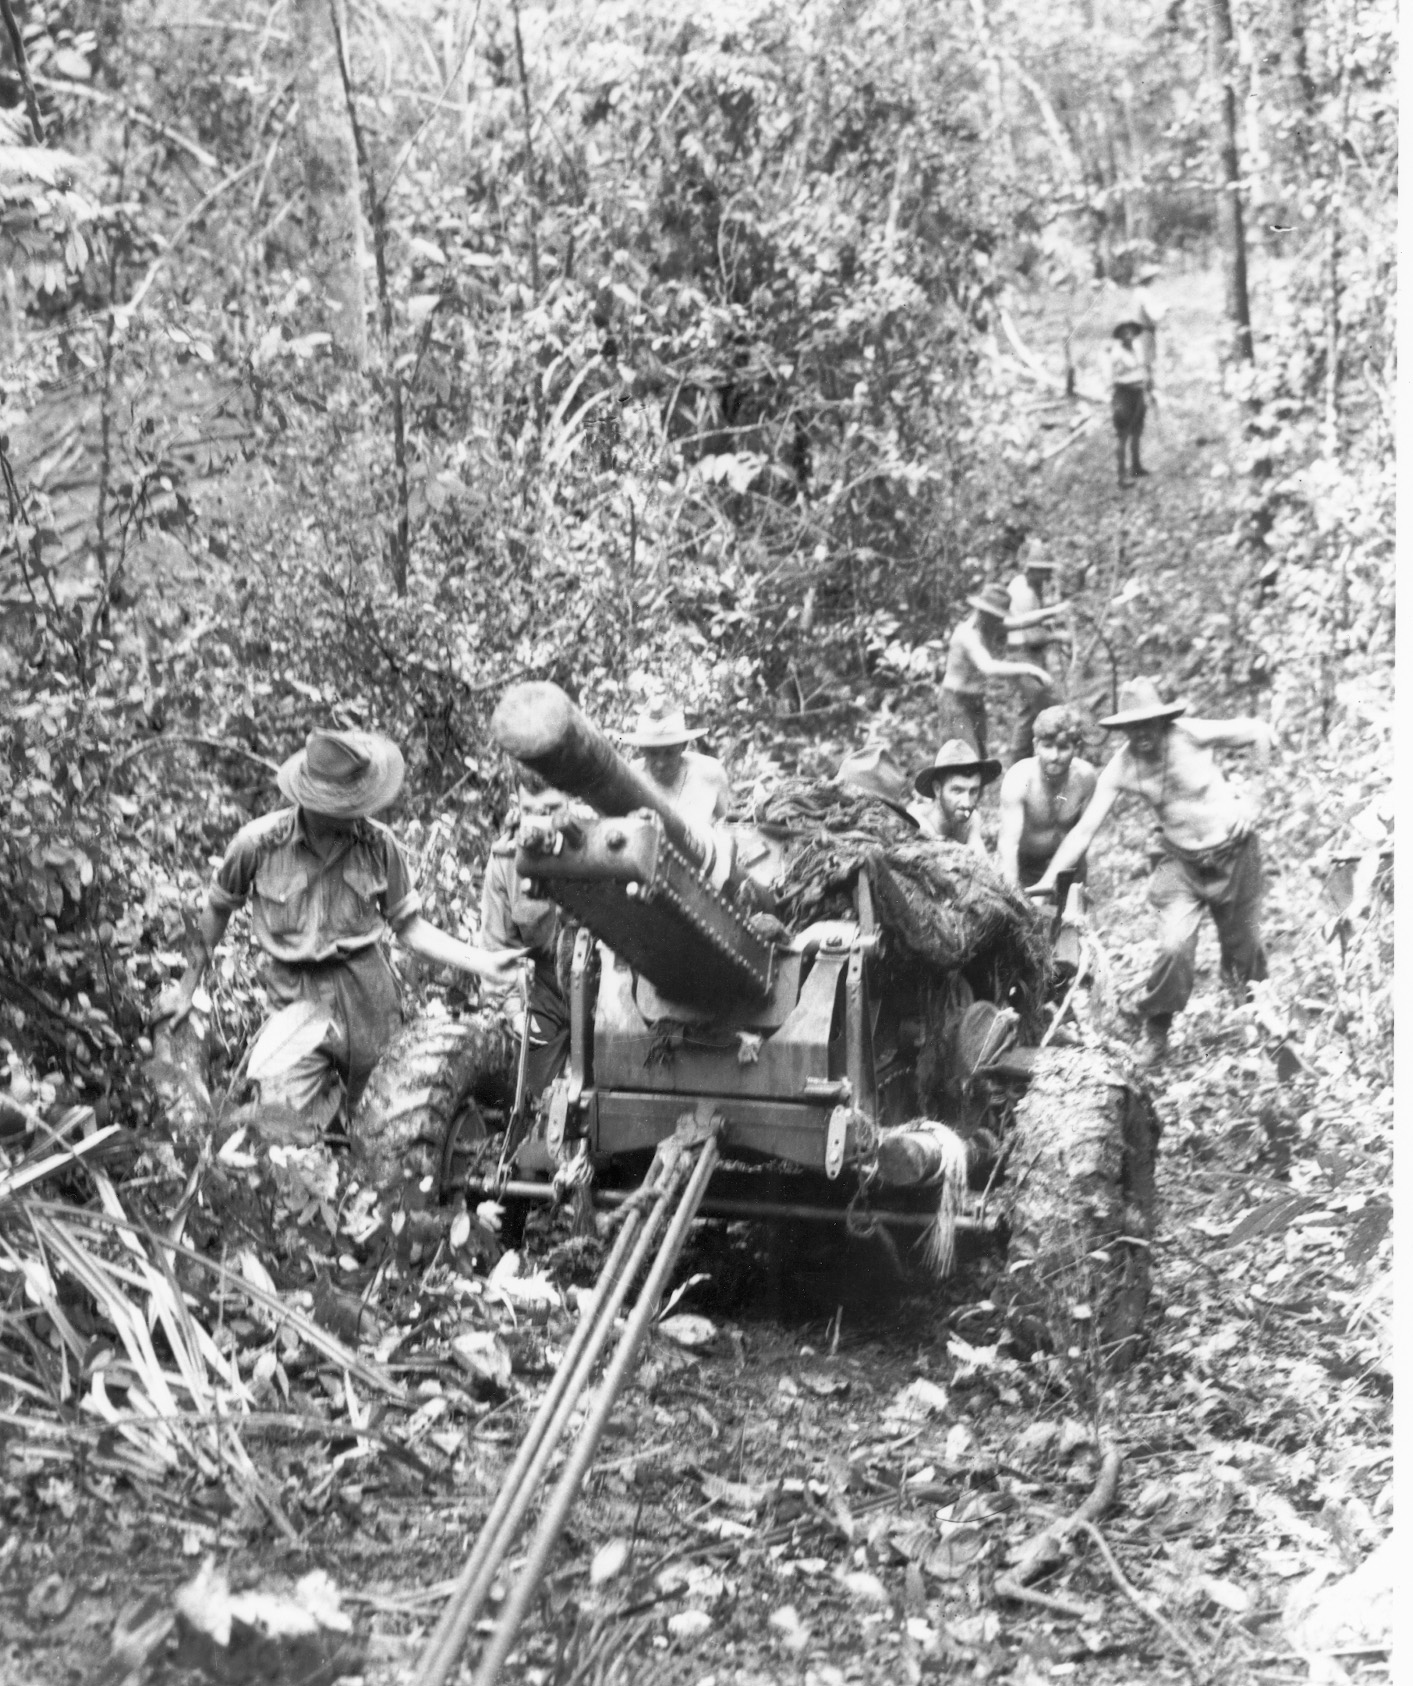 Australians haul a 25-pounder gun up a portion of the track.